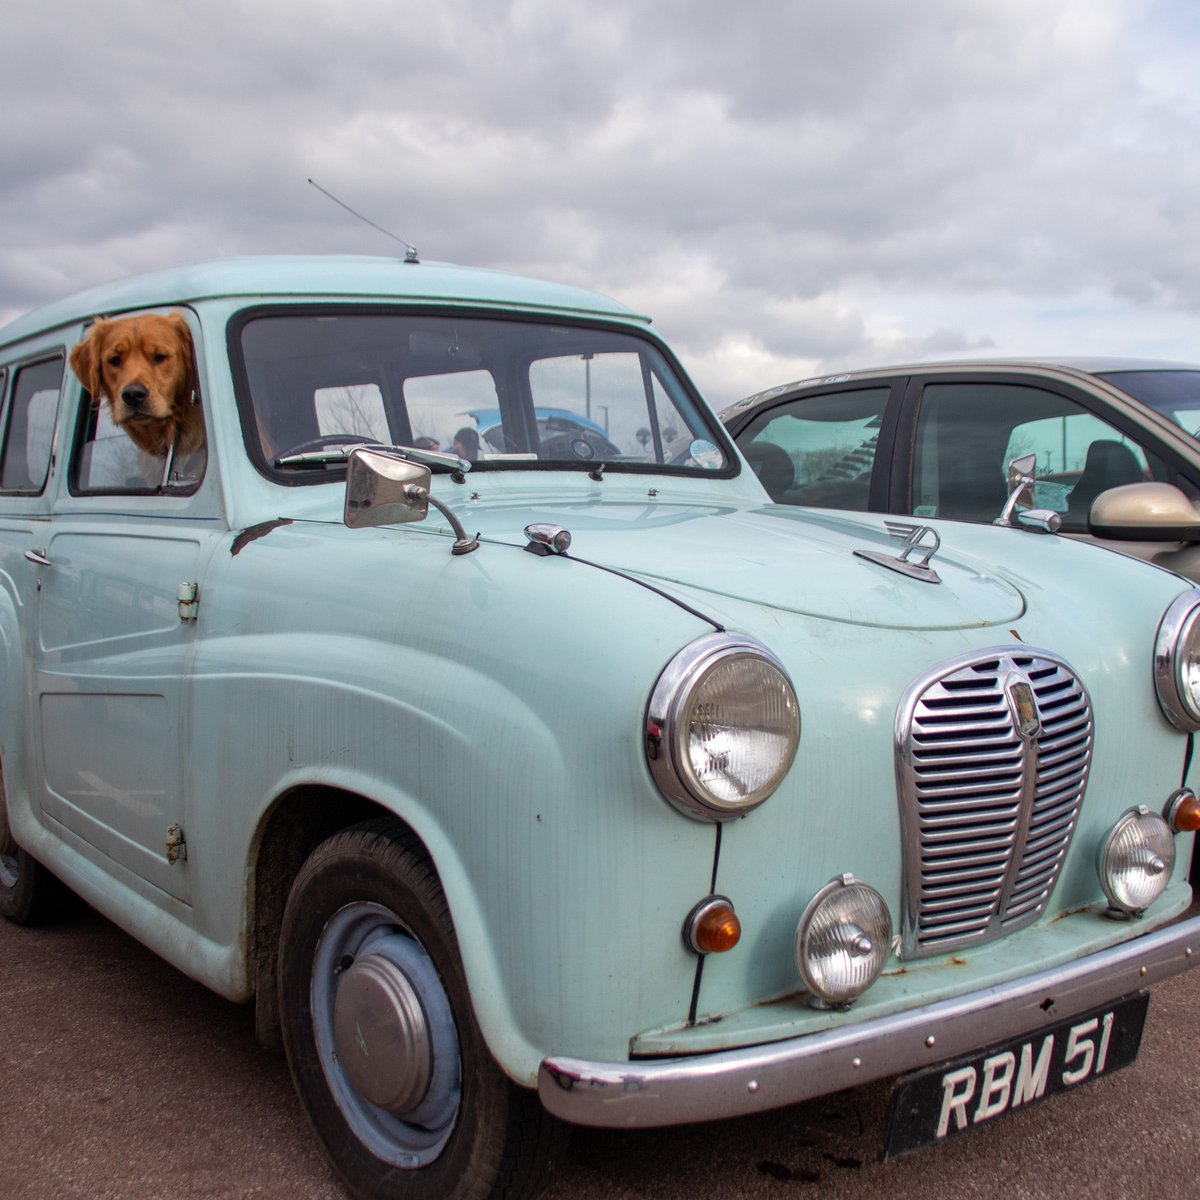 Finlay out in the classic #AustinA30 today at #rustival #goldenretrievers #classiccars #driversseat #RBM51 #petphotography #dogphotography #carphotography